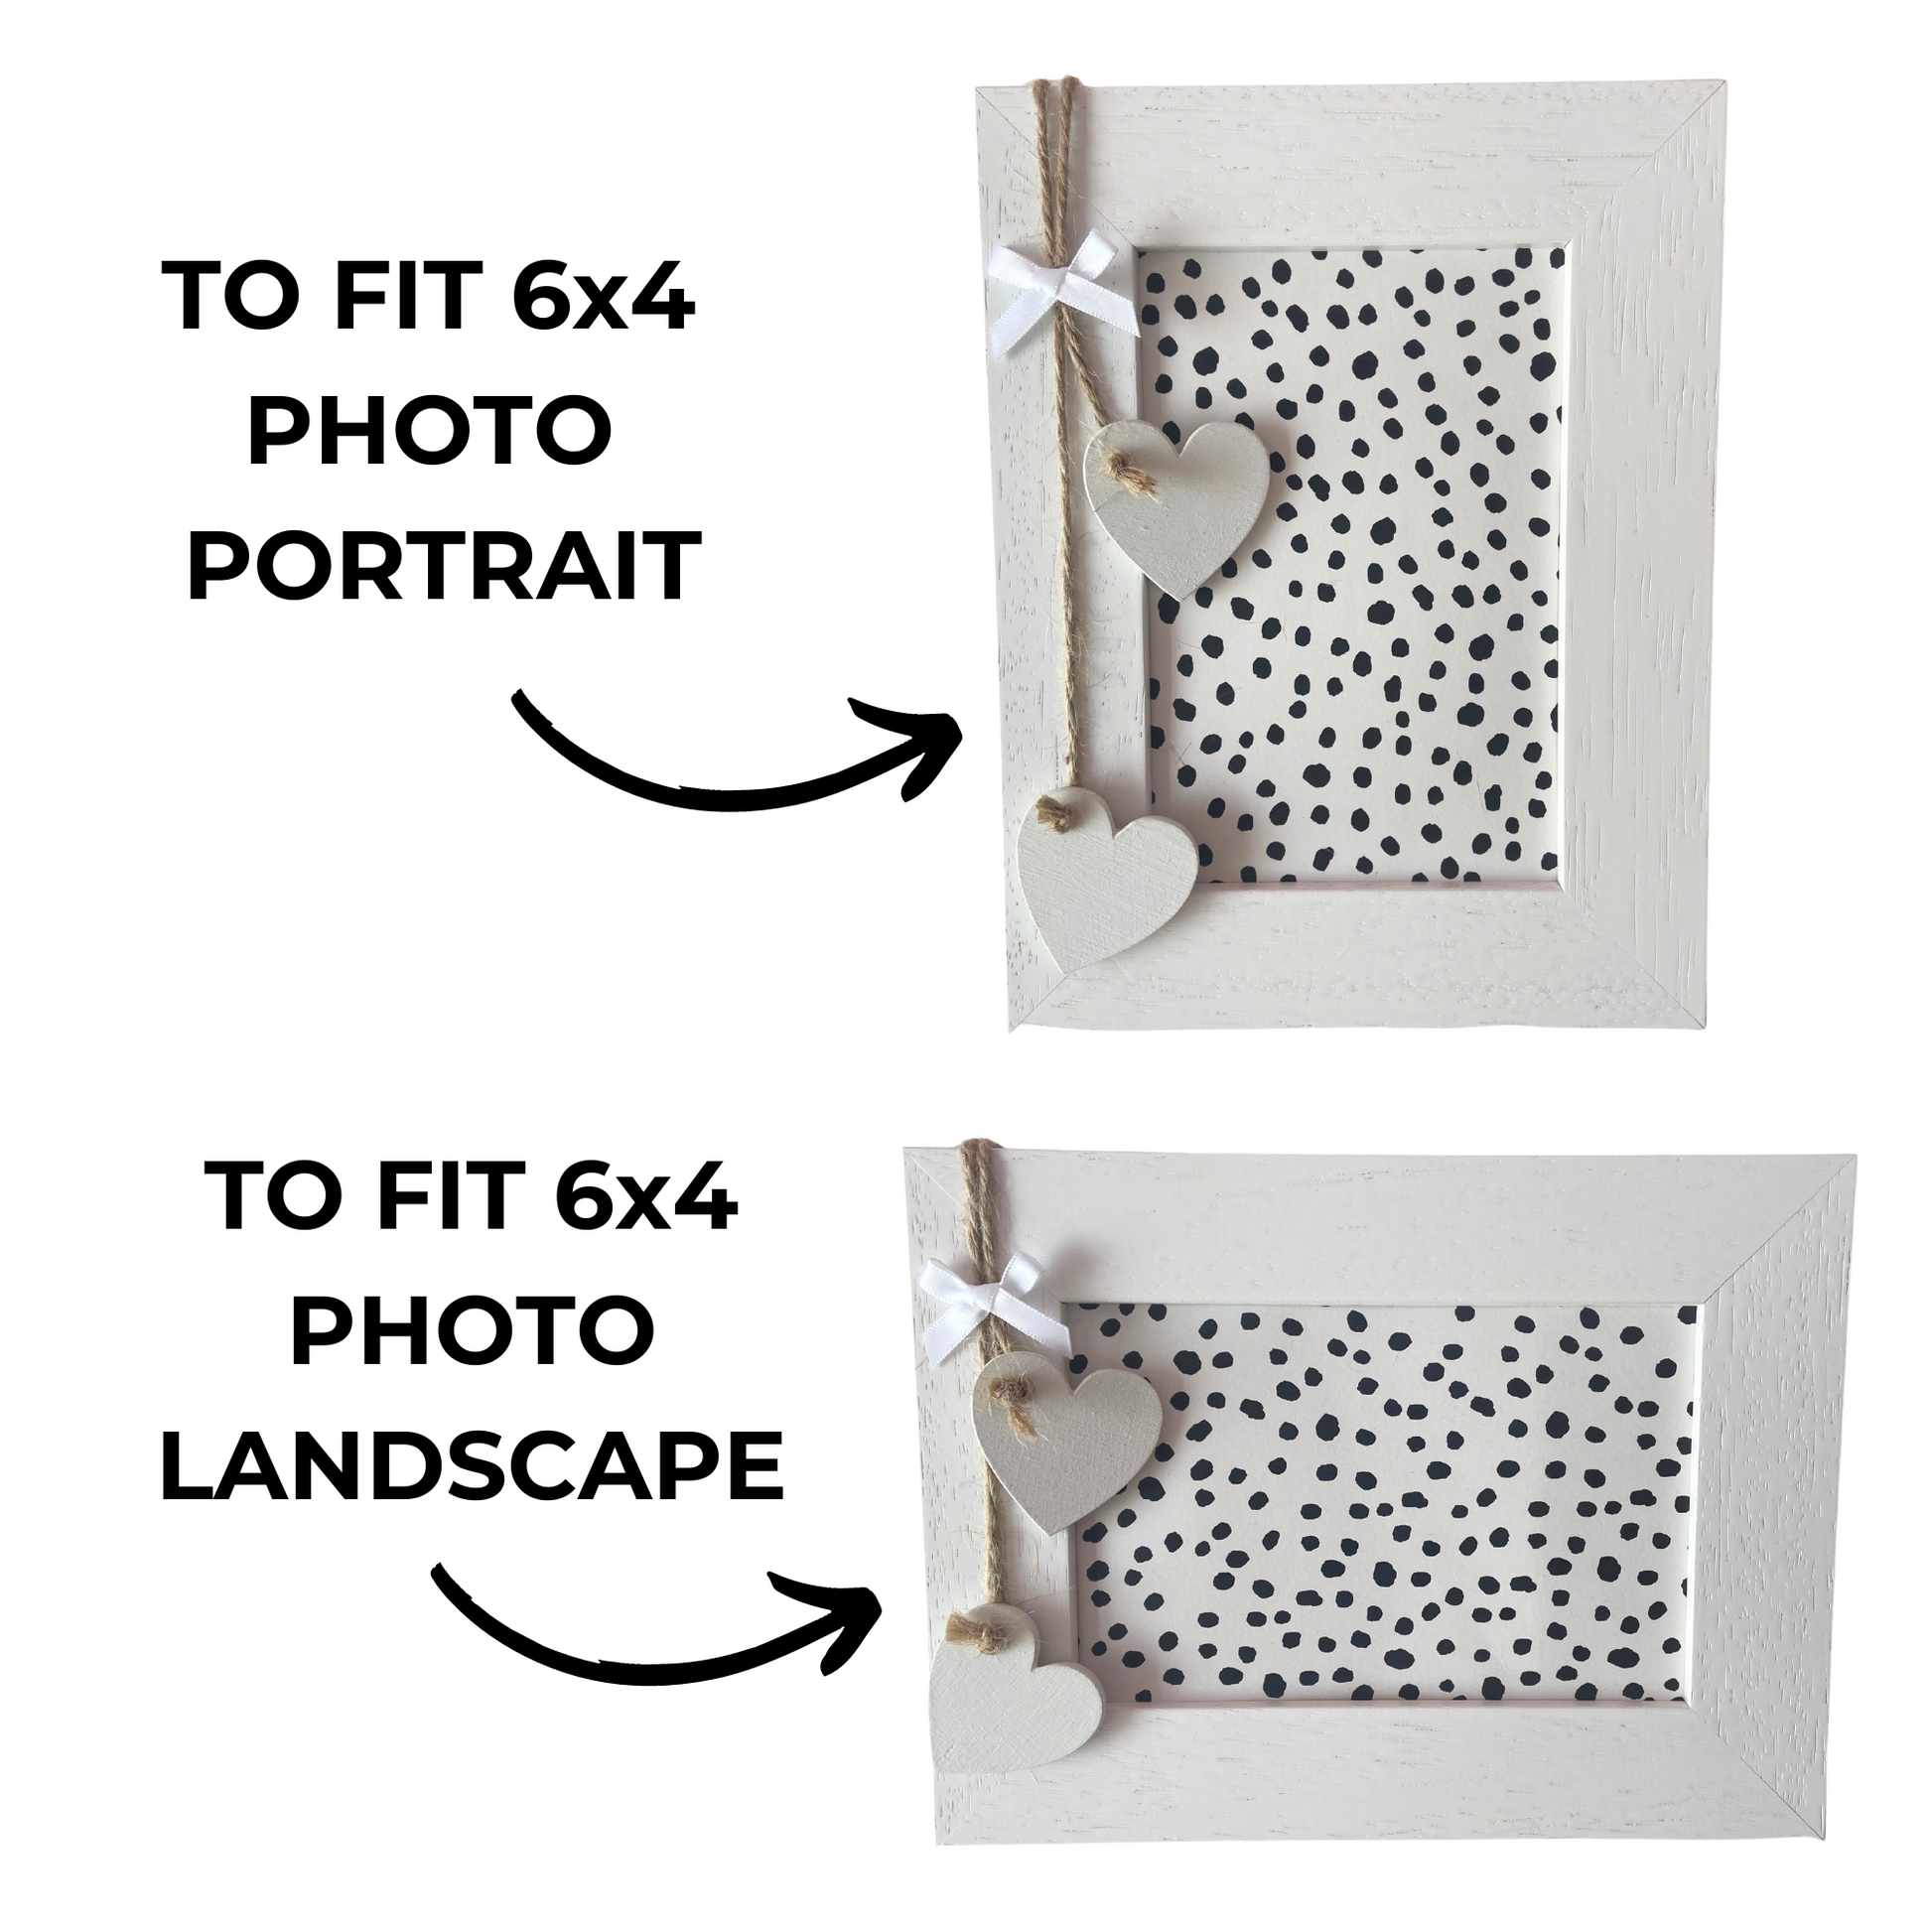 Photo frame, showing an example of the portrait and landscape 6x4